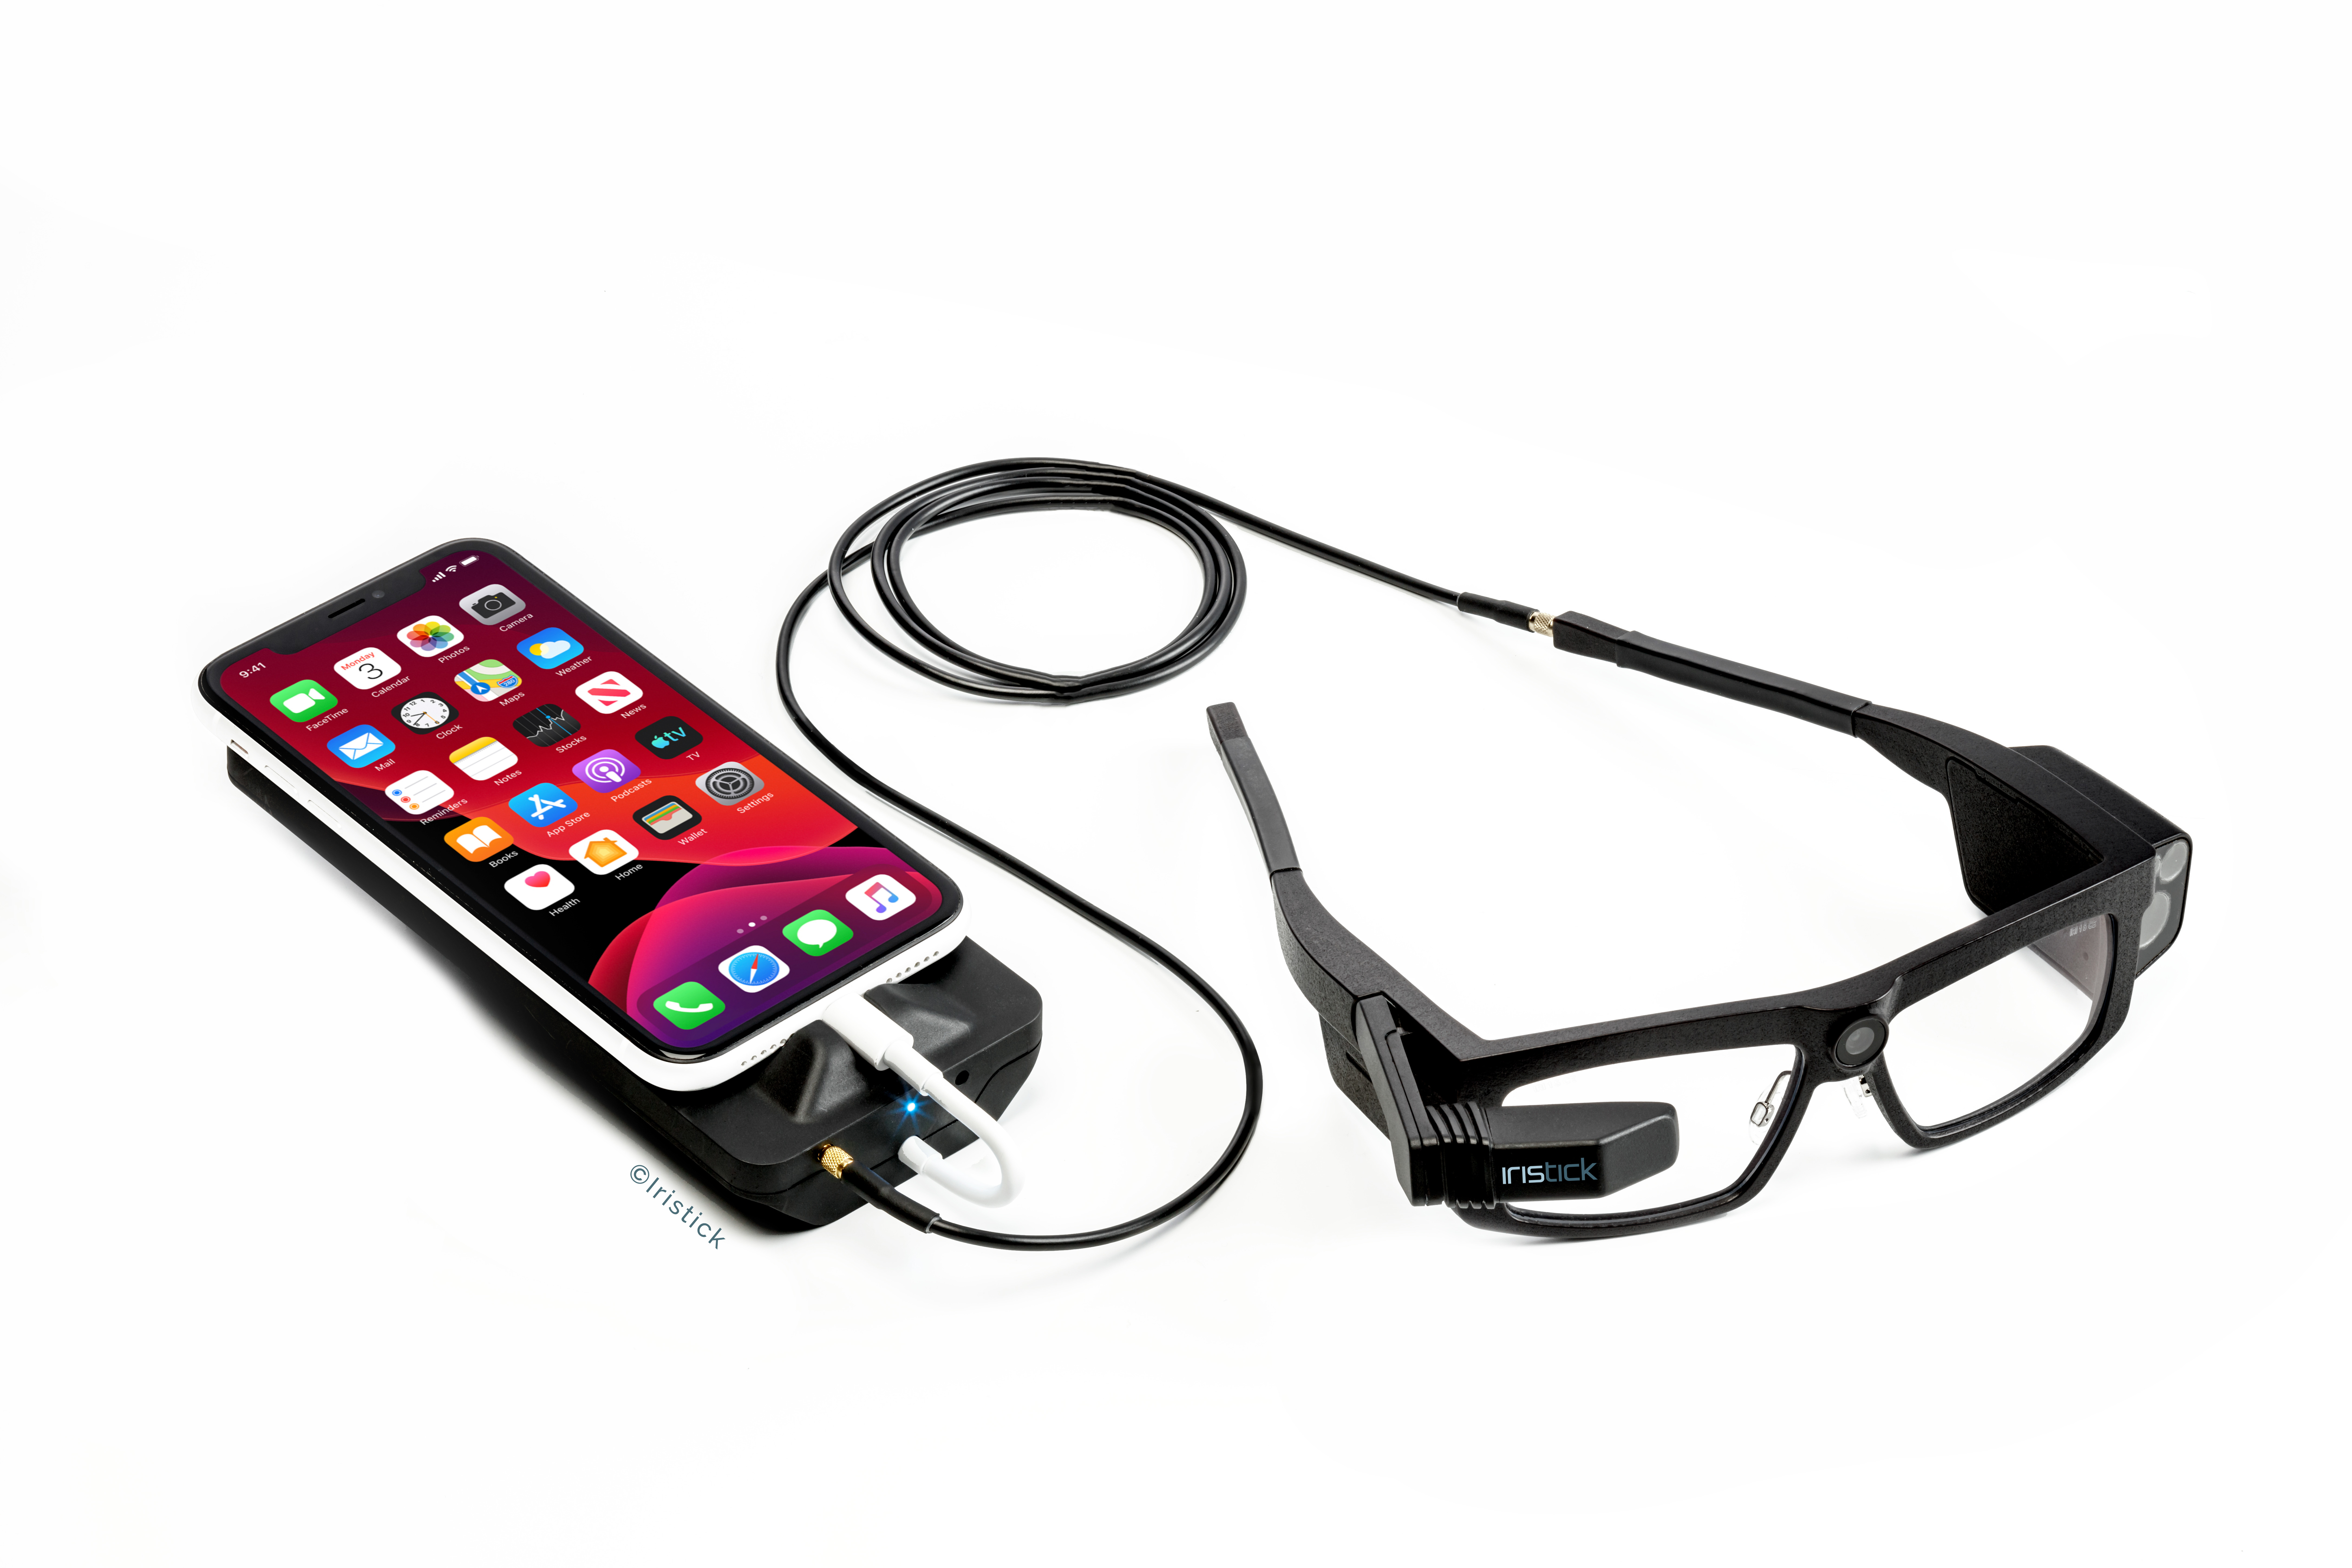 Iristick's second generation smart glasses are compatible with a wide range of smartphones, both iOS and Android